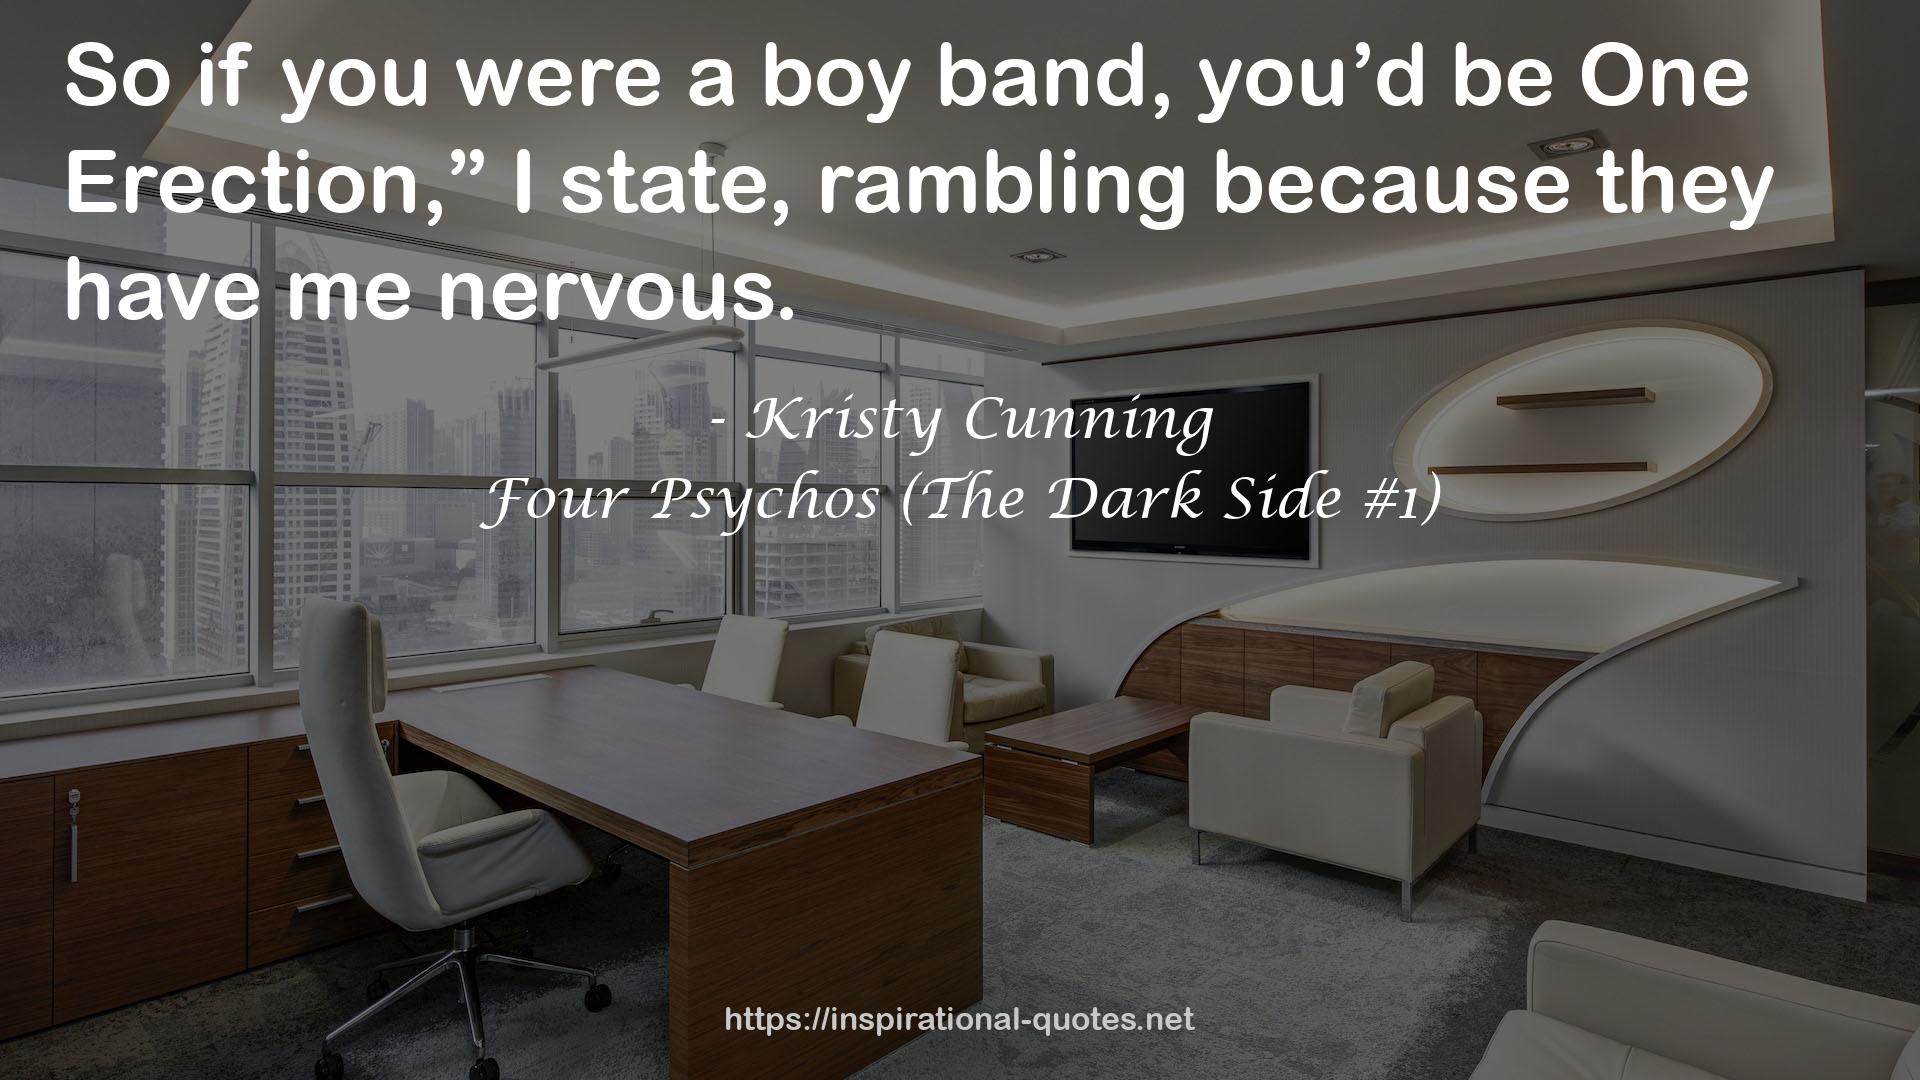 Four Psychos (The Dark Side #1) QUOTES